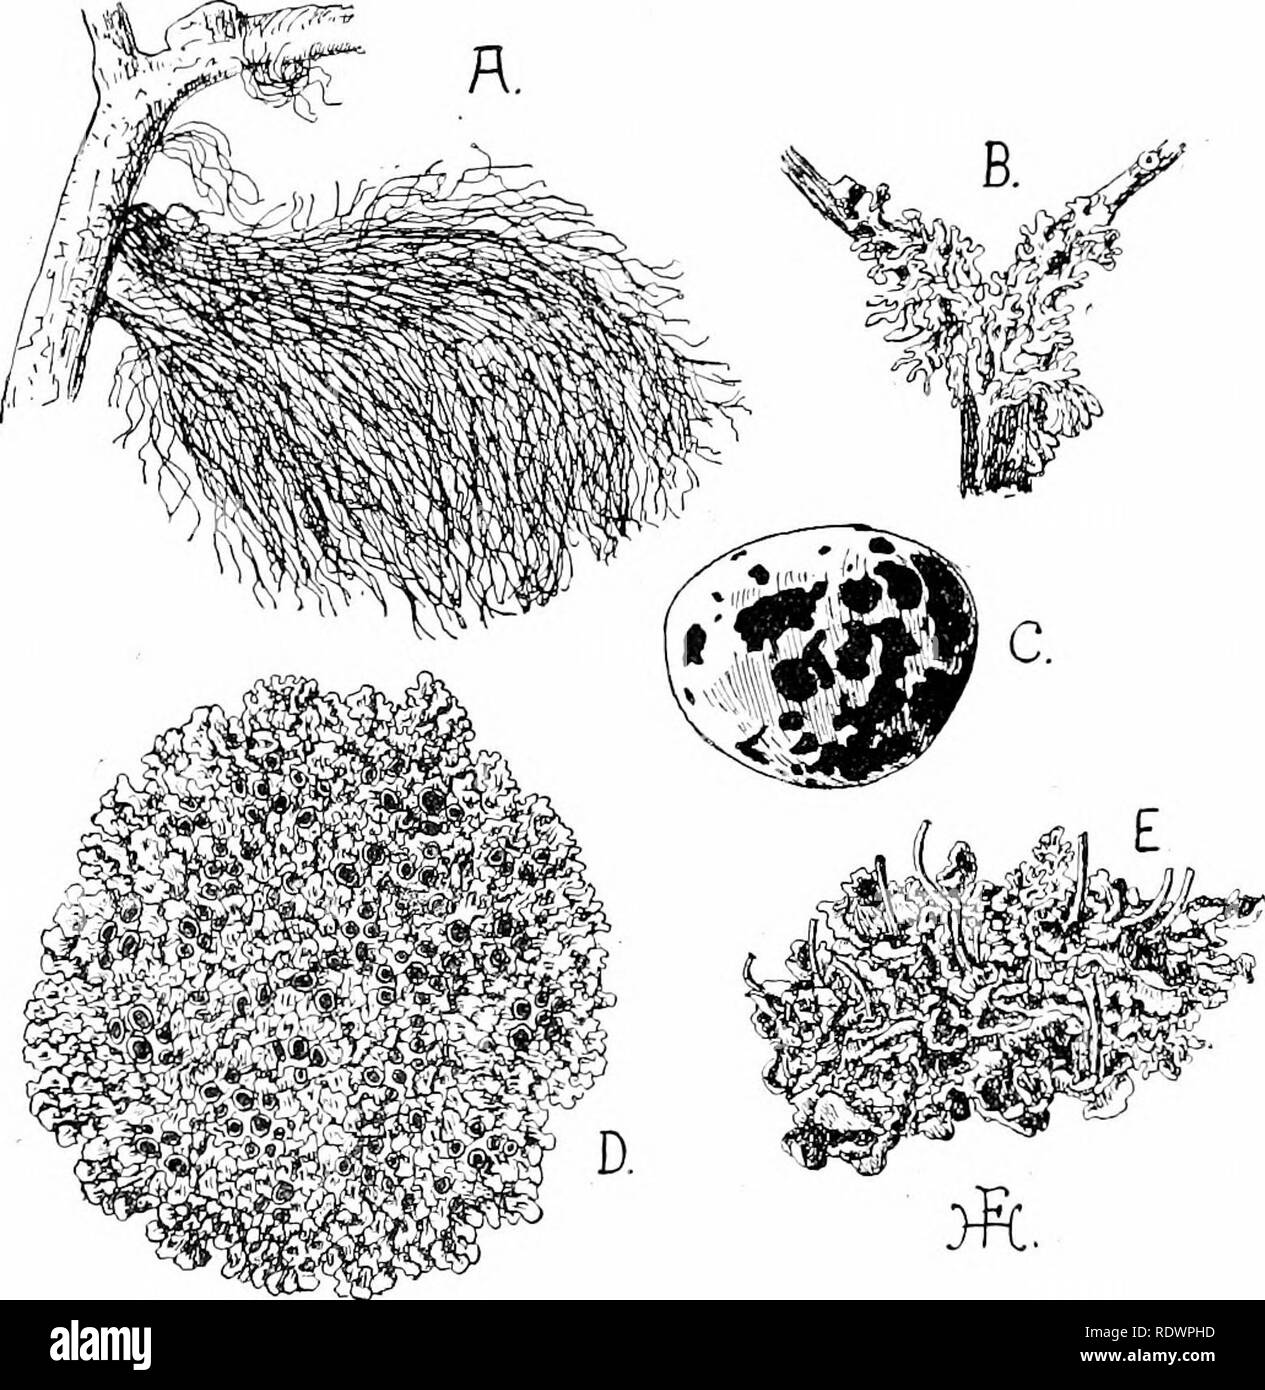 . An introduction to the structure and reproduction of plants. Plant anatomy; Plants. 258 LICHENS of a shingic-bcach, are due to various Lichens {e.g. Rhizocarpon confervoides, Fig. 141, C), which are here the iirst colonisers. The shape of the thallus is very diverse, and, as a general rule, almost entirely determined by the Fungus. It most com- monly takes the form of fiat, lobed expansions which are often. Fig. 141.—Various common Lichens. A, Usnea barbata. B, Partnelia physodes, on twig. C, Rhizocarpon confervoides, on pebble from shingle- beach at Pevensey. D, Xantlioria parietina (showin Stock Photo